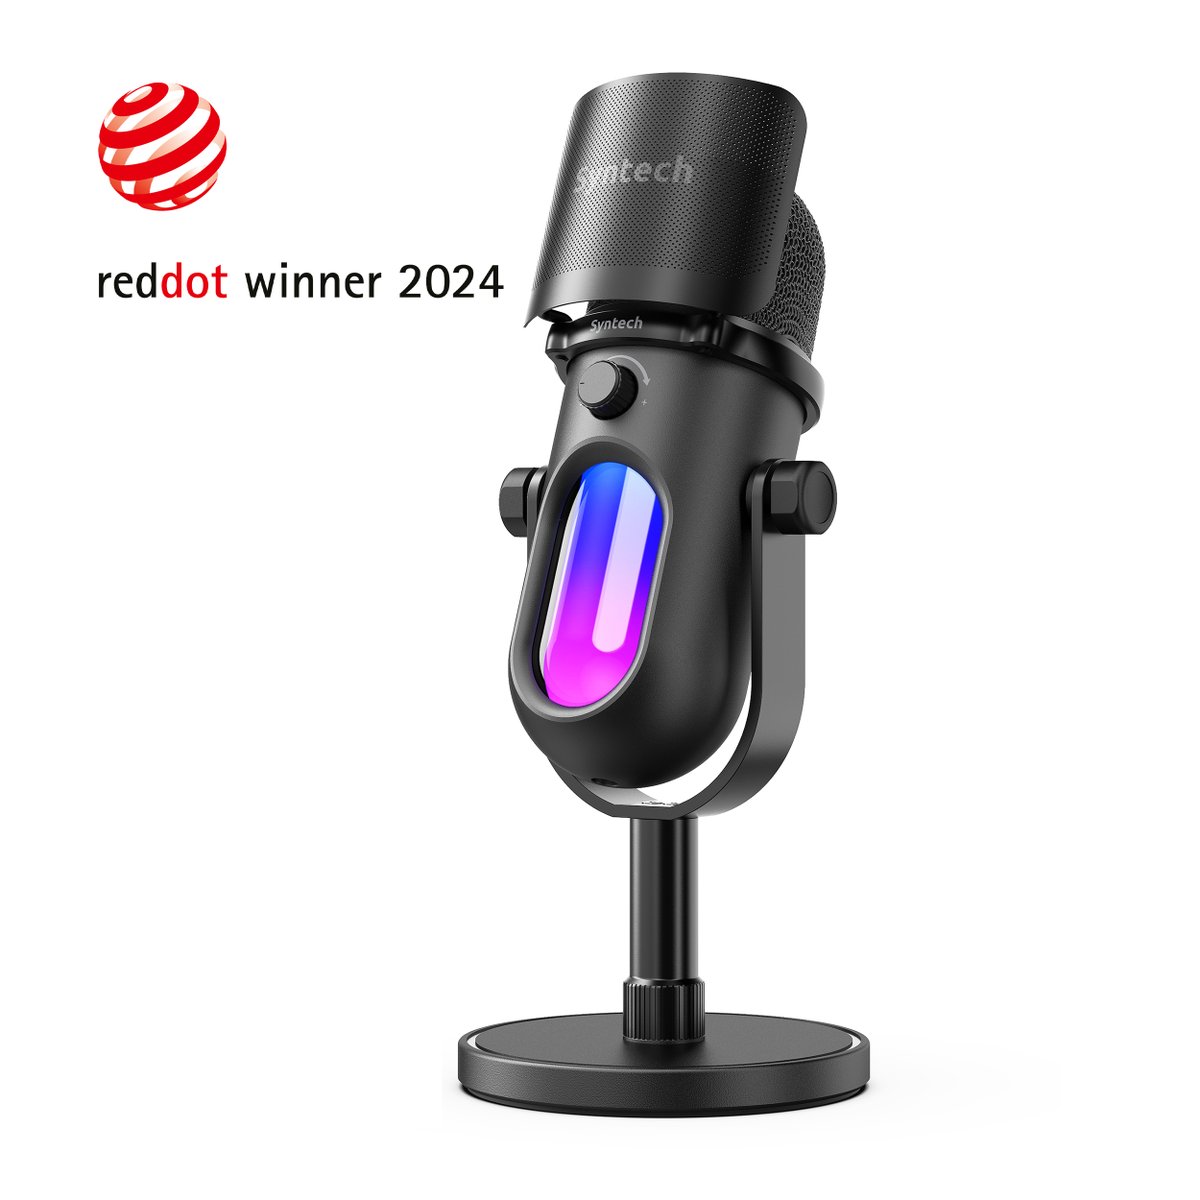 We are thrilled to announce that our GlowMic won the 2024 Red Dot Design Award !

#reddotaward #syntech #syntechglowmic #RGB #rgblighting #gamingmicrophone #reddotdesign #reddotwinner #streamingservice #podcasting #gamingmics #streamertechnology